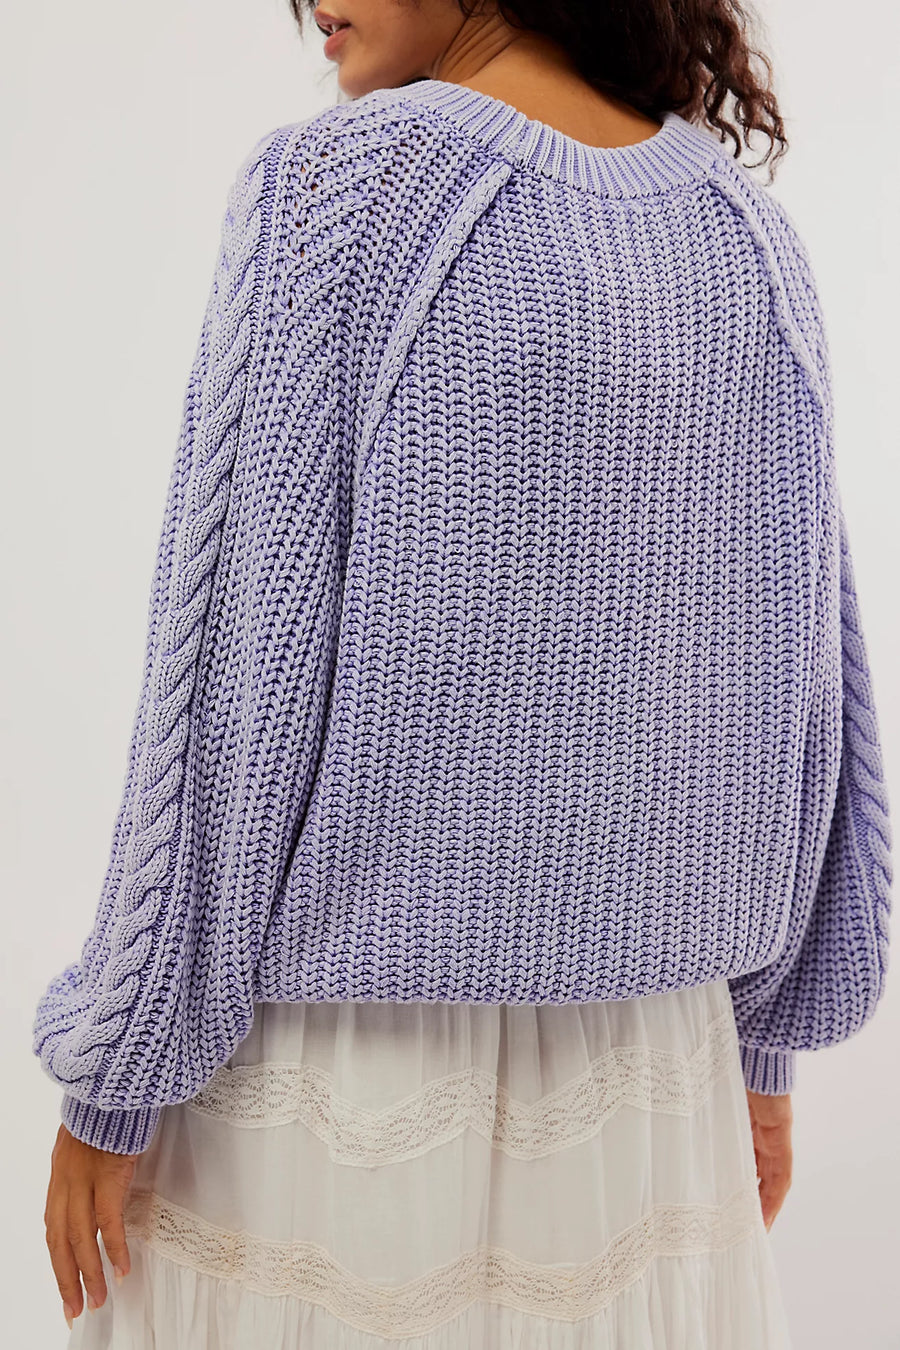 Free People Frankie Cable Sweater - Heavenly Lavender